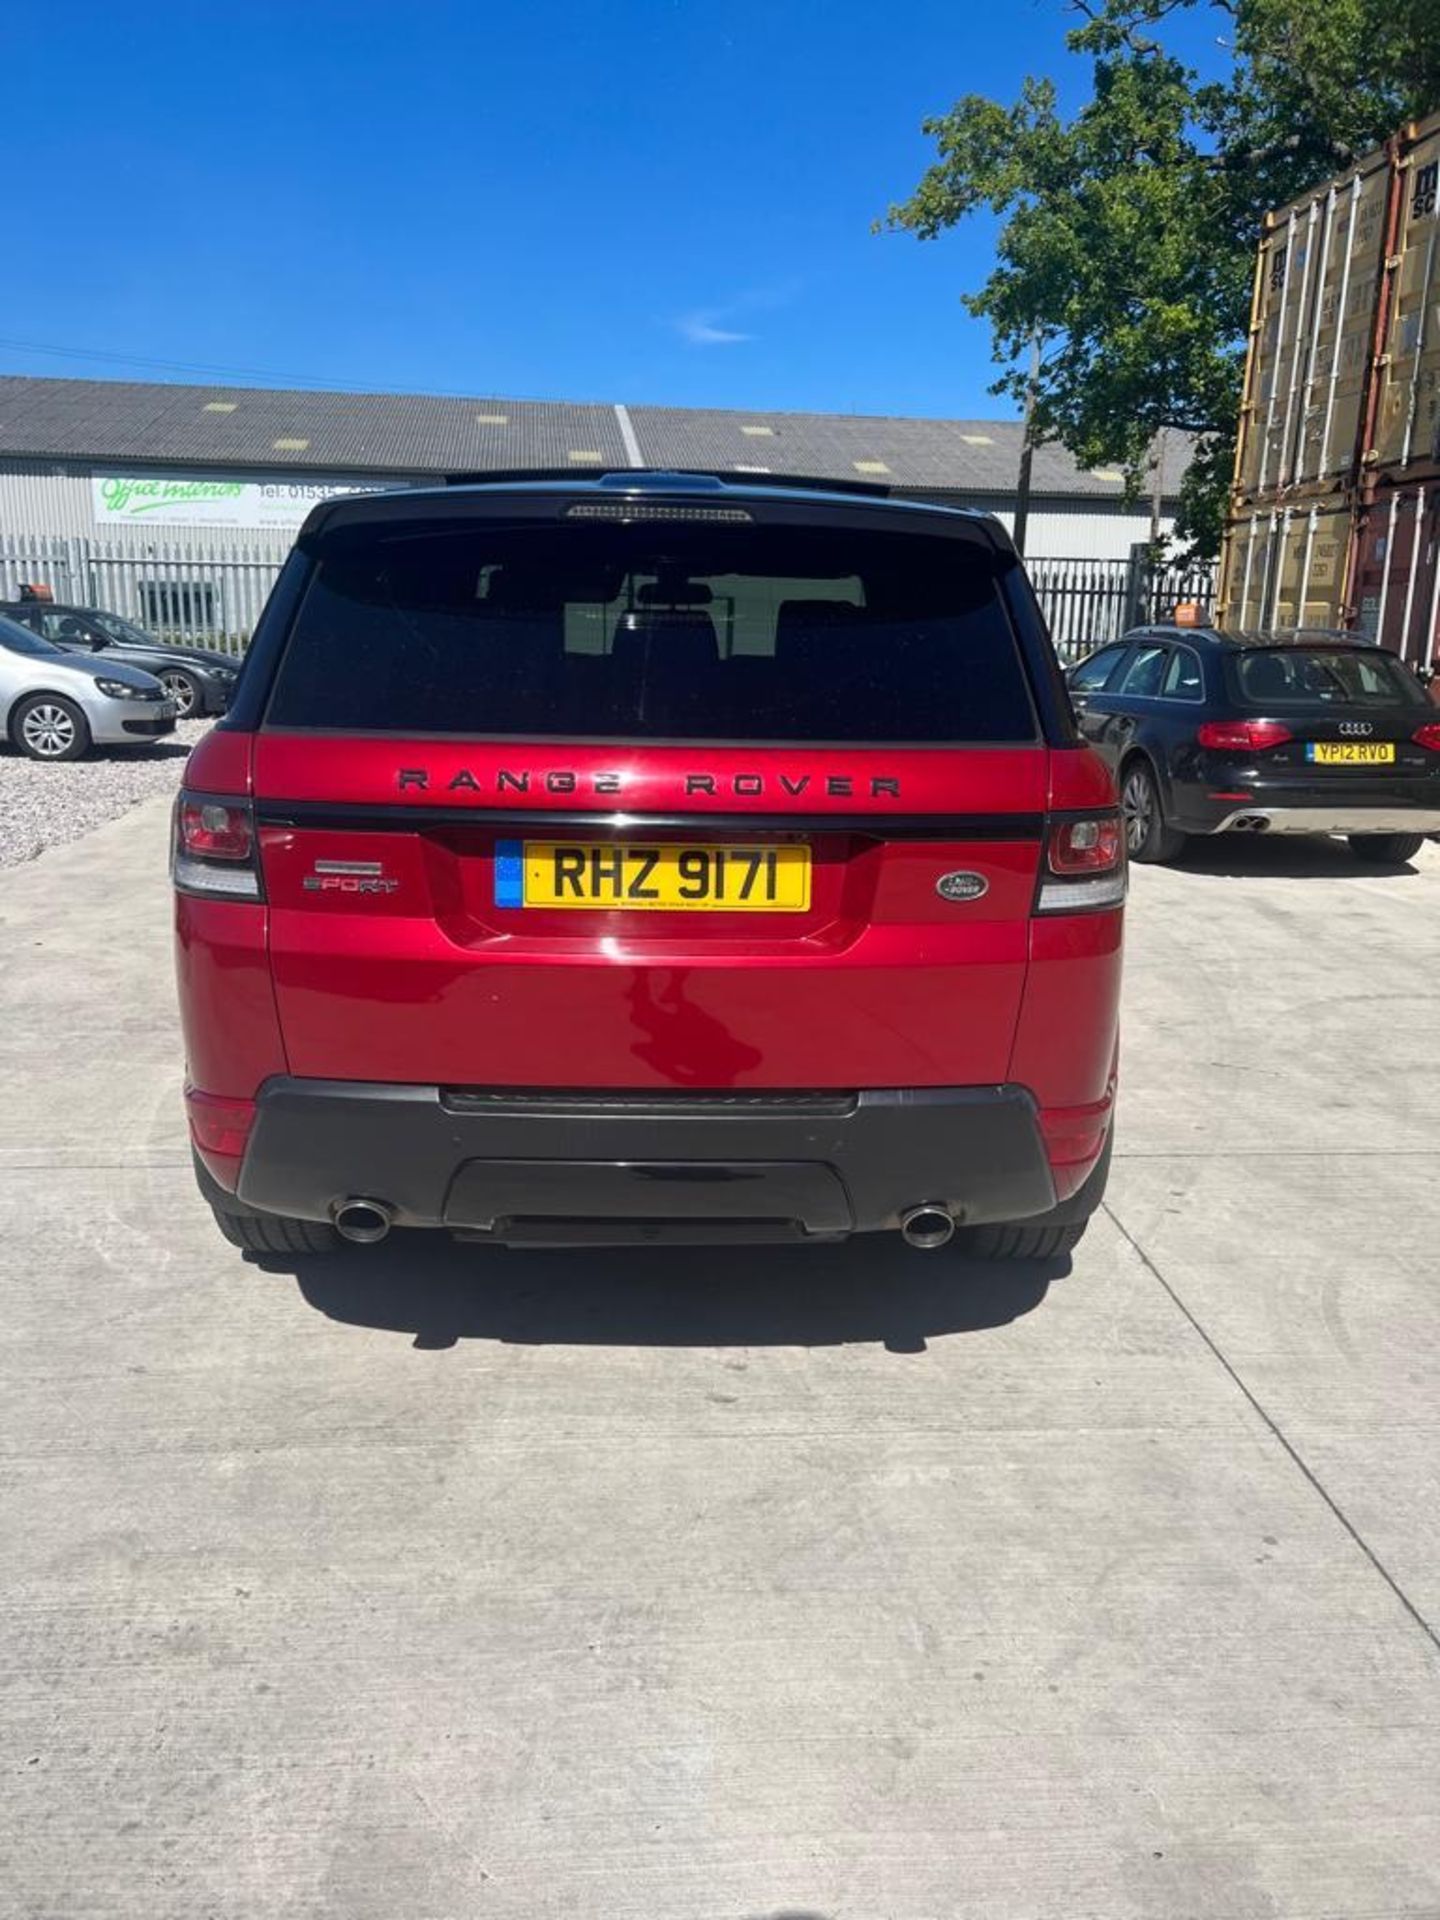 2014 LAND ROVER RANGE ROVER SPORT AUTOBIOGRAPHY DYNAMIC SDV8 AUTOMATIC RED *PLUS VAT* - Image 6 of 13